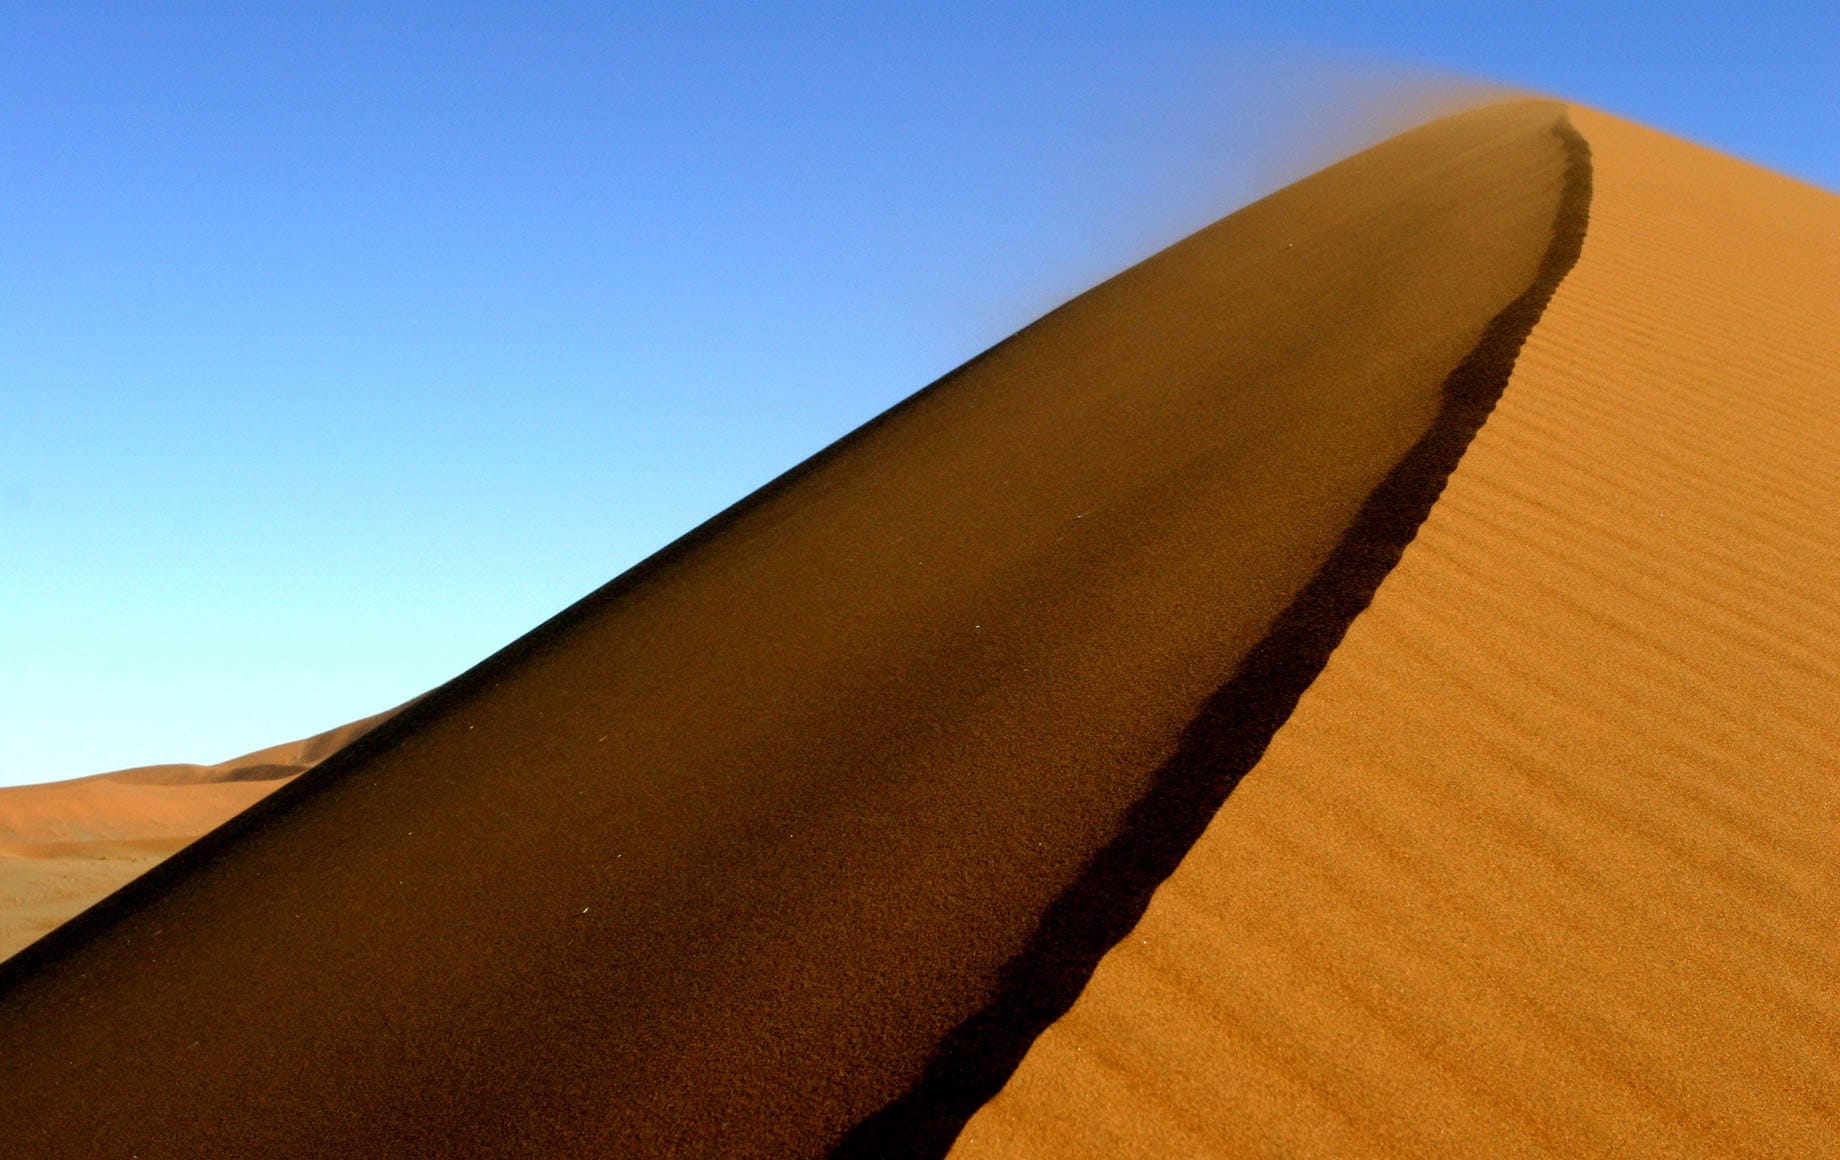 Sand blowing away with the wind at Sossusvlei Namib Desert